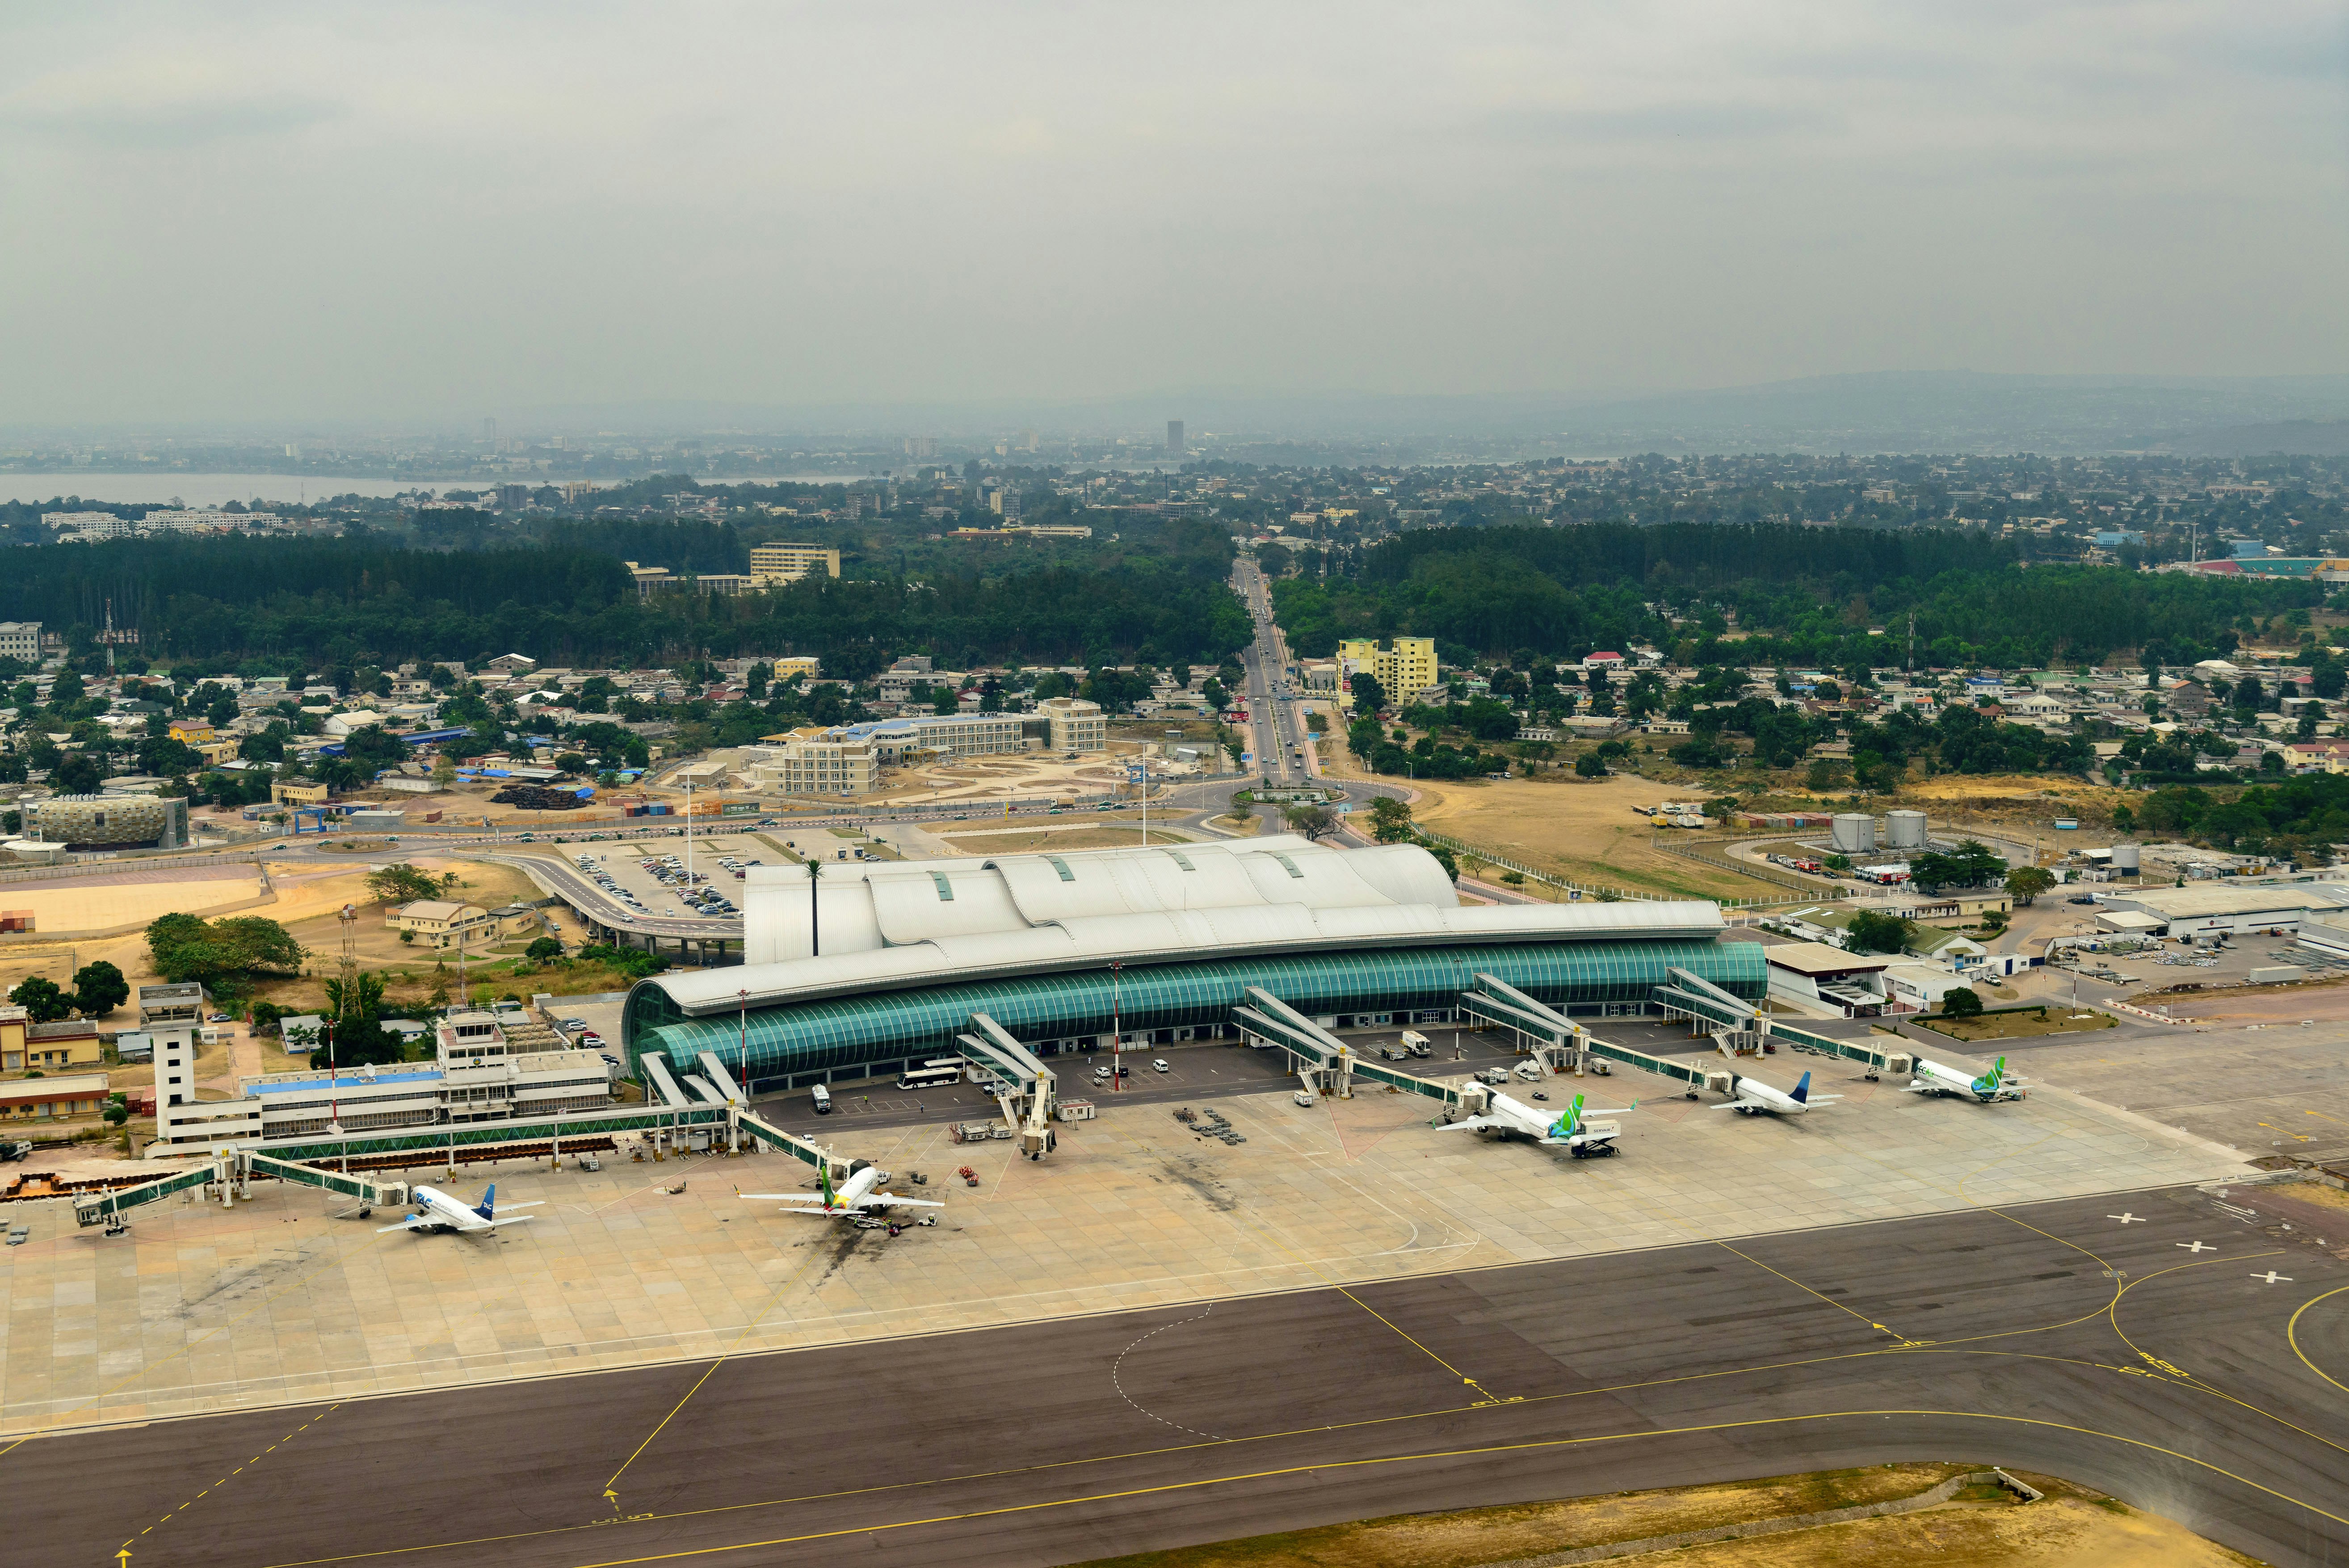 An exterior shot of the Maya Maya Airport in Brazzaville in the Republic of Congo shoes five planes parked outside a long silver modernist airport with a long teal awning in front. In the background is a rich forested landscape with a city beyond it and water on the horizon